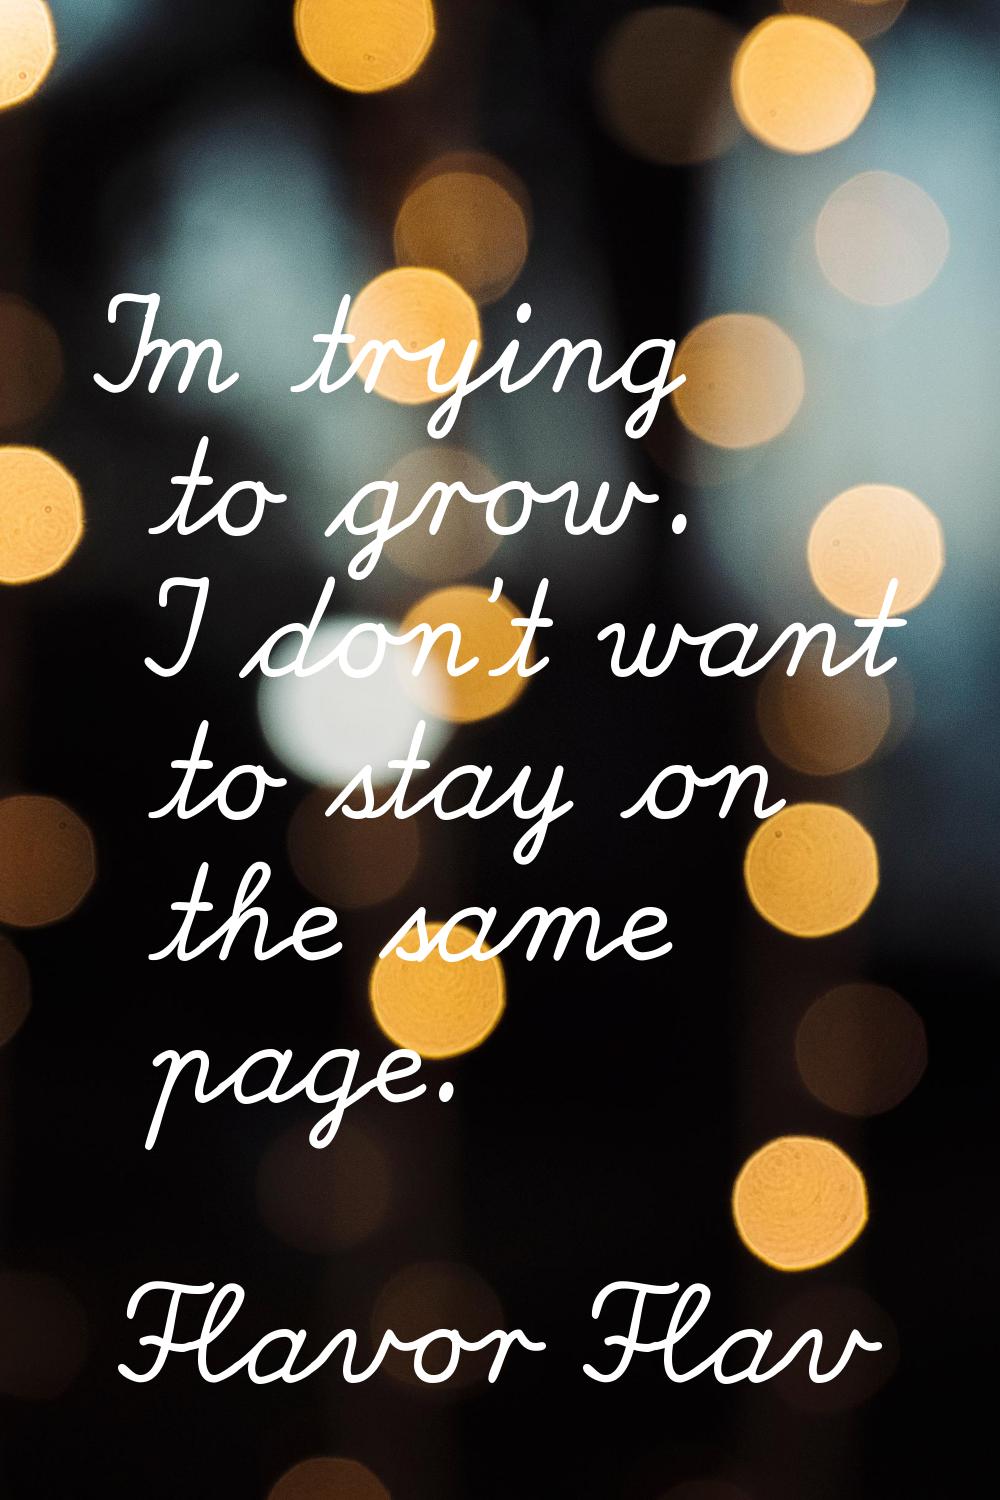 I'm trying to grow. I don't want to stay on the same page.